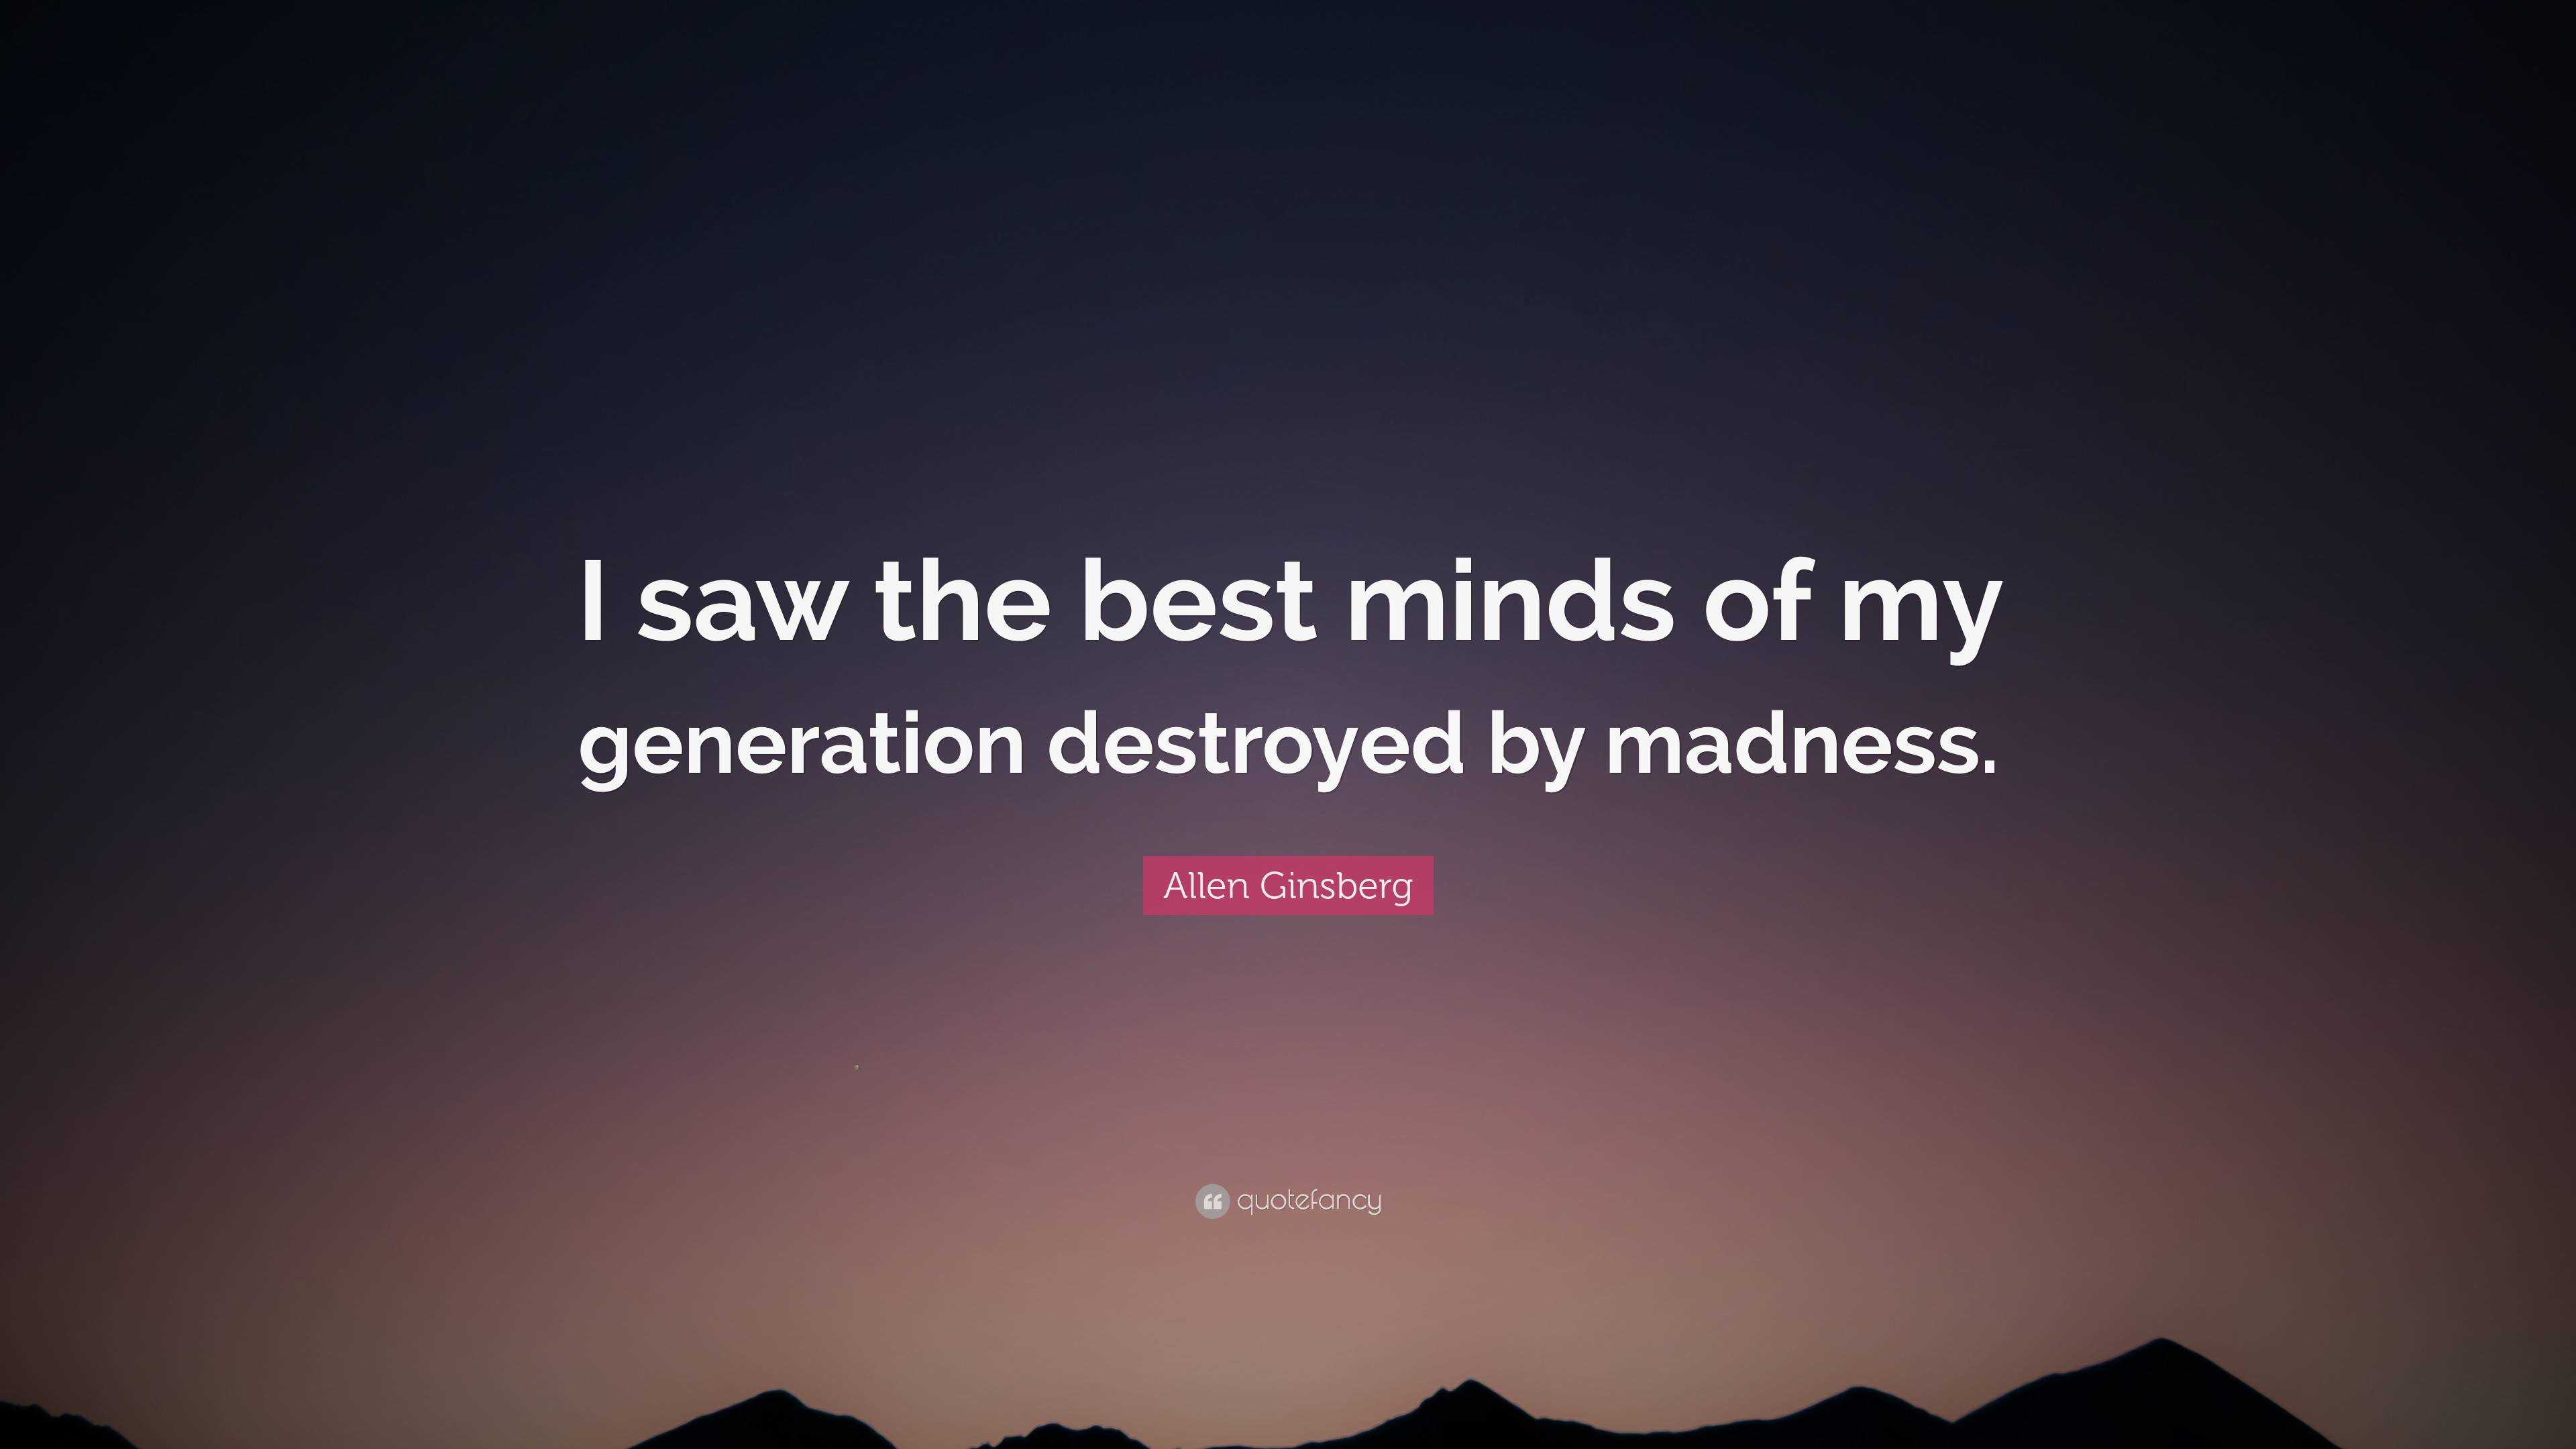 Allen Ginsberg Quote: “I saw the best minds my generation by madness.”